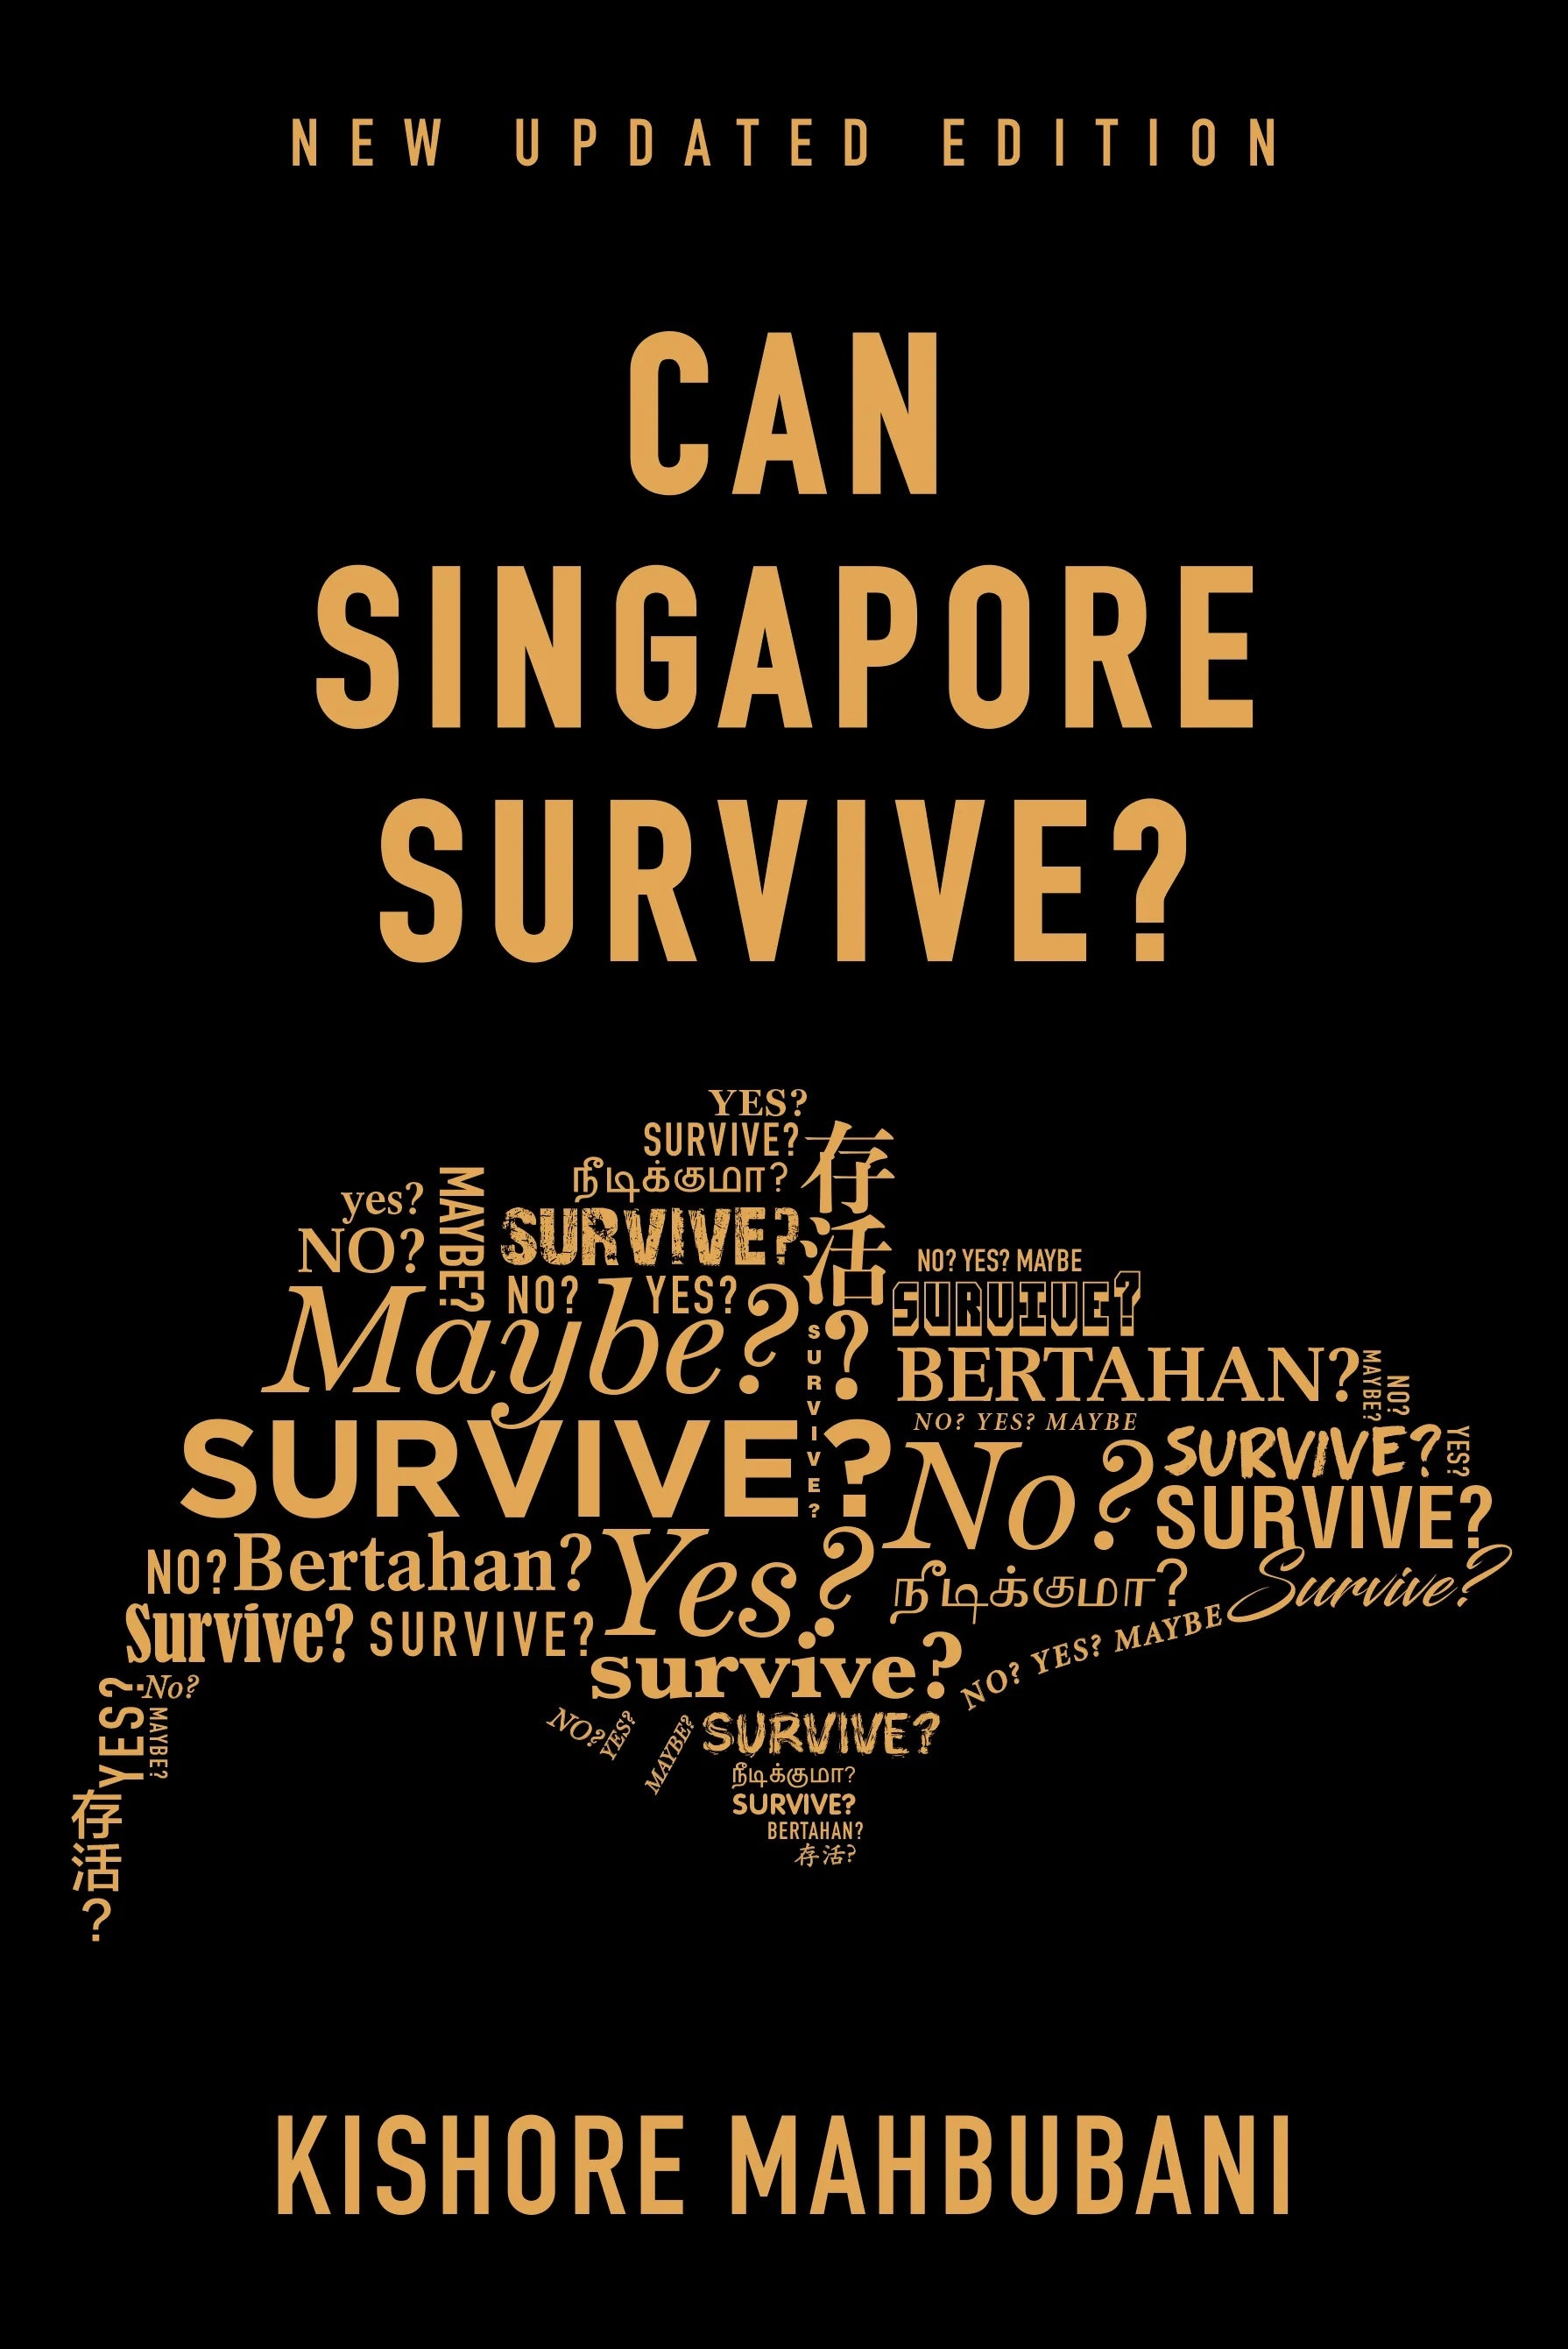 Can Singapore Survive? (New Updated Edition)